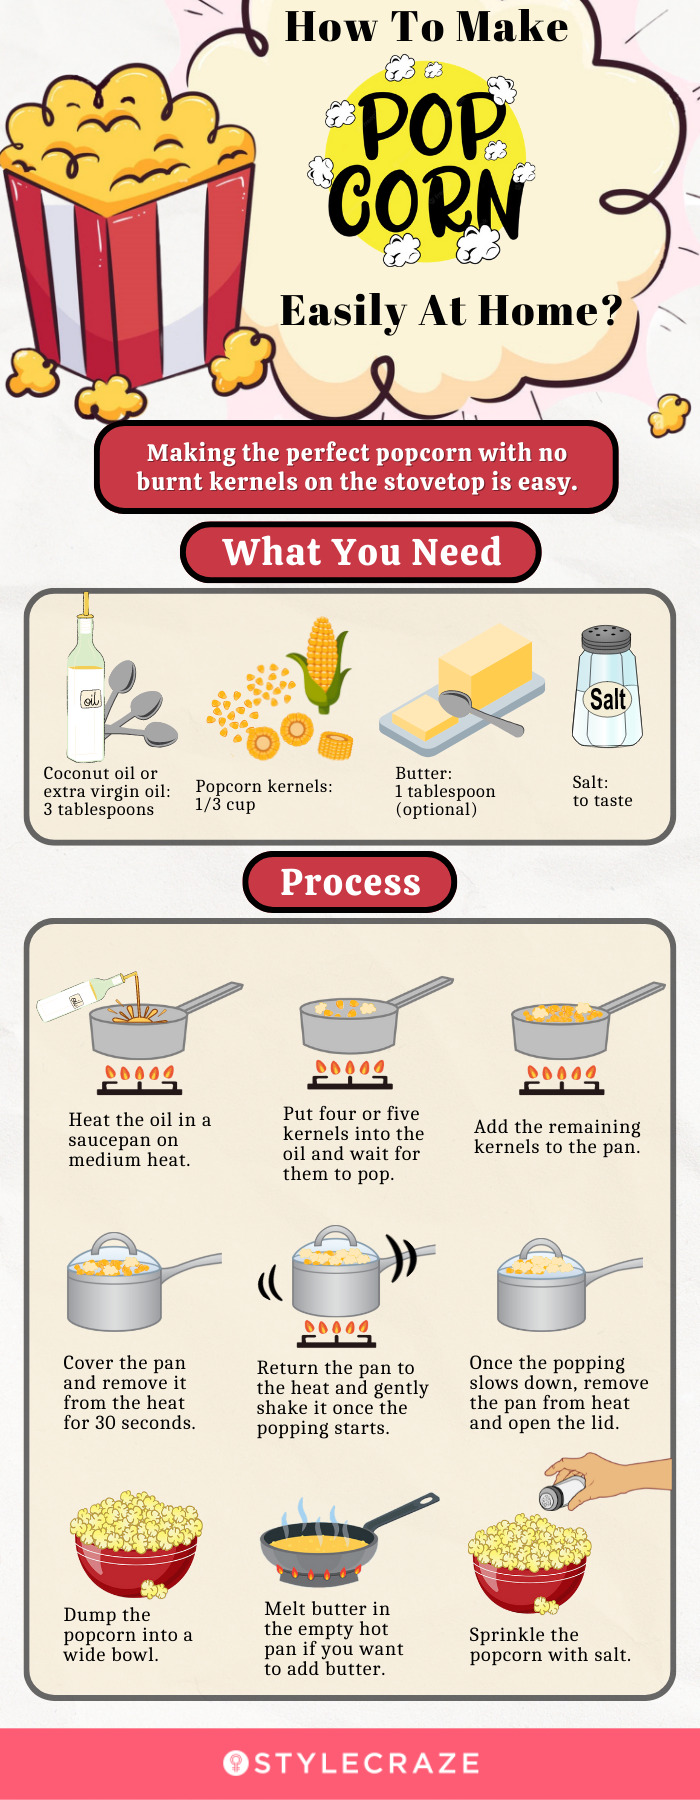 how to make pop corn easily at home (infographic)